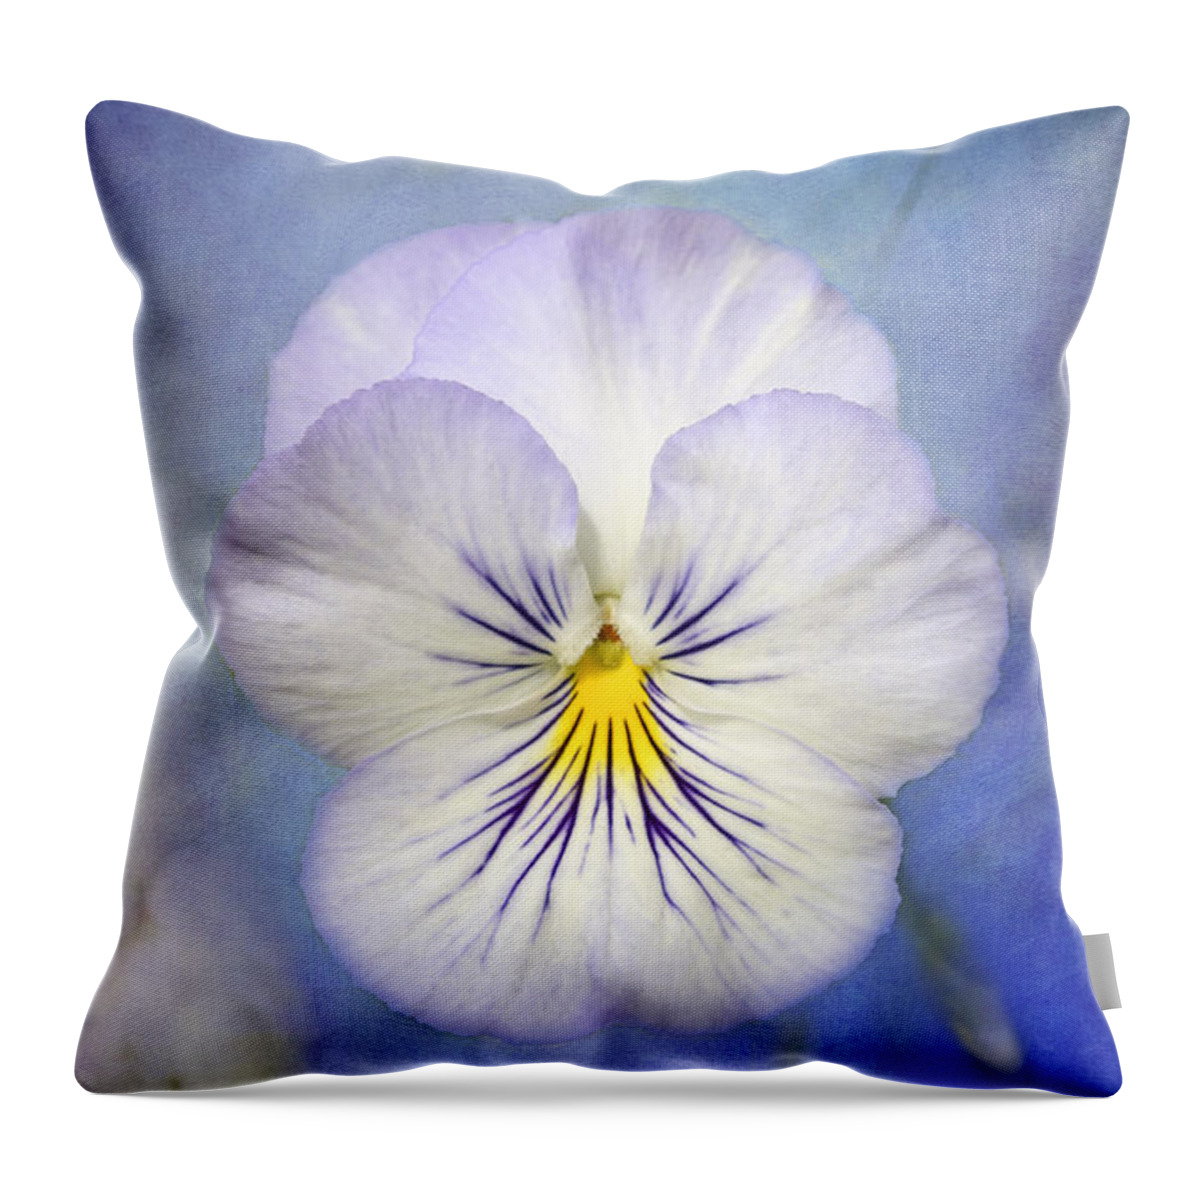 White Pancy Flower Throw Pillow featuring the photograph Angel Wings by Marina Kojukhova